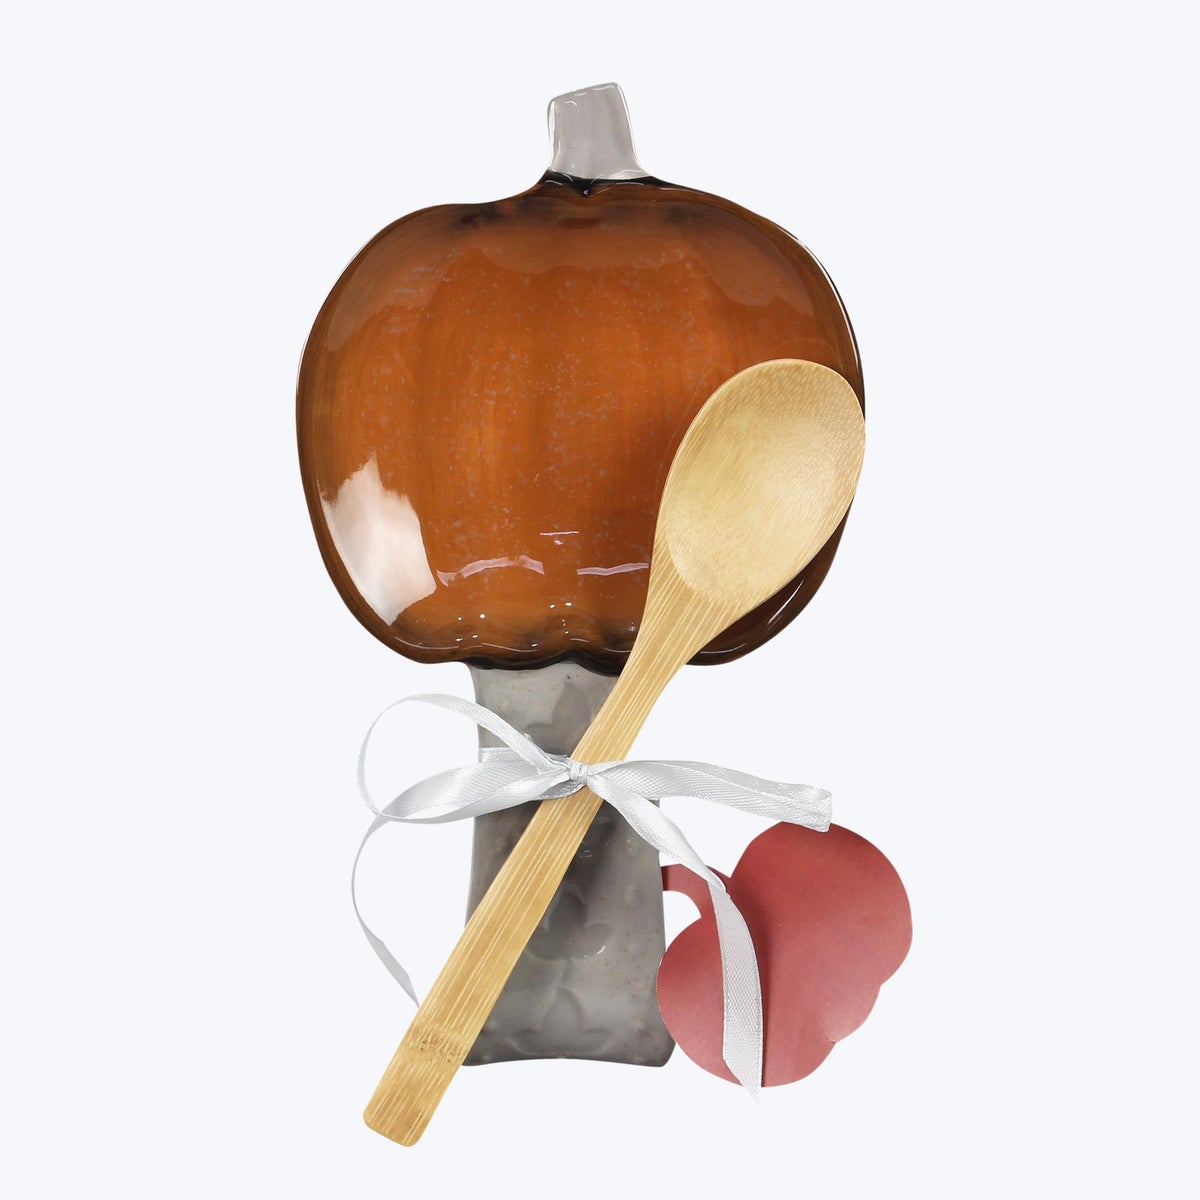 Ceramic Fall Harmony Pumpkin Spoon Rest with Wood Spoon Set of 2 Gift Set